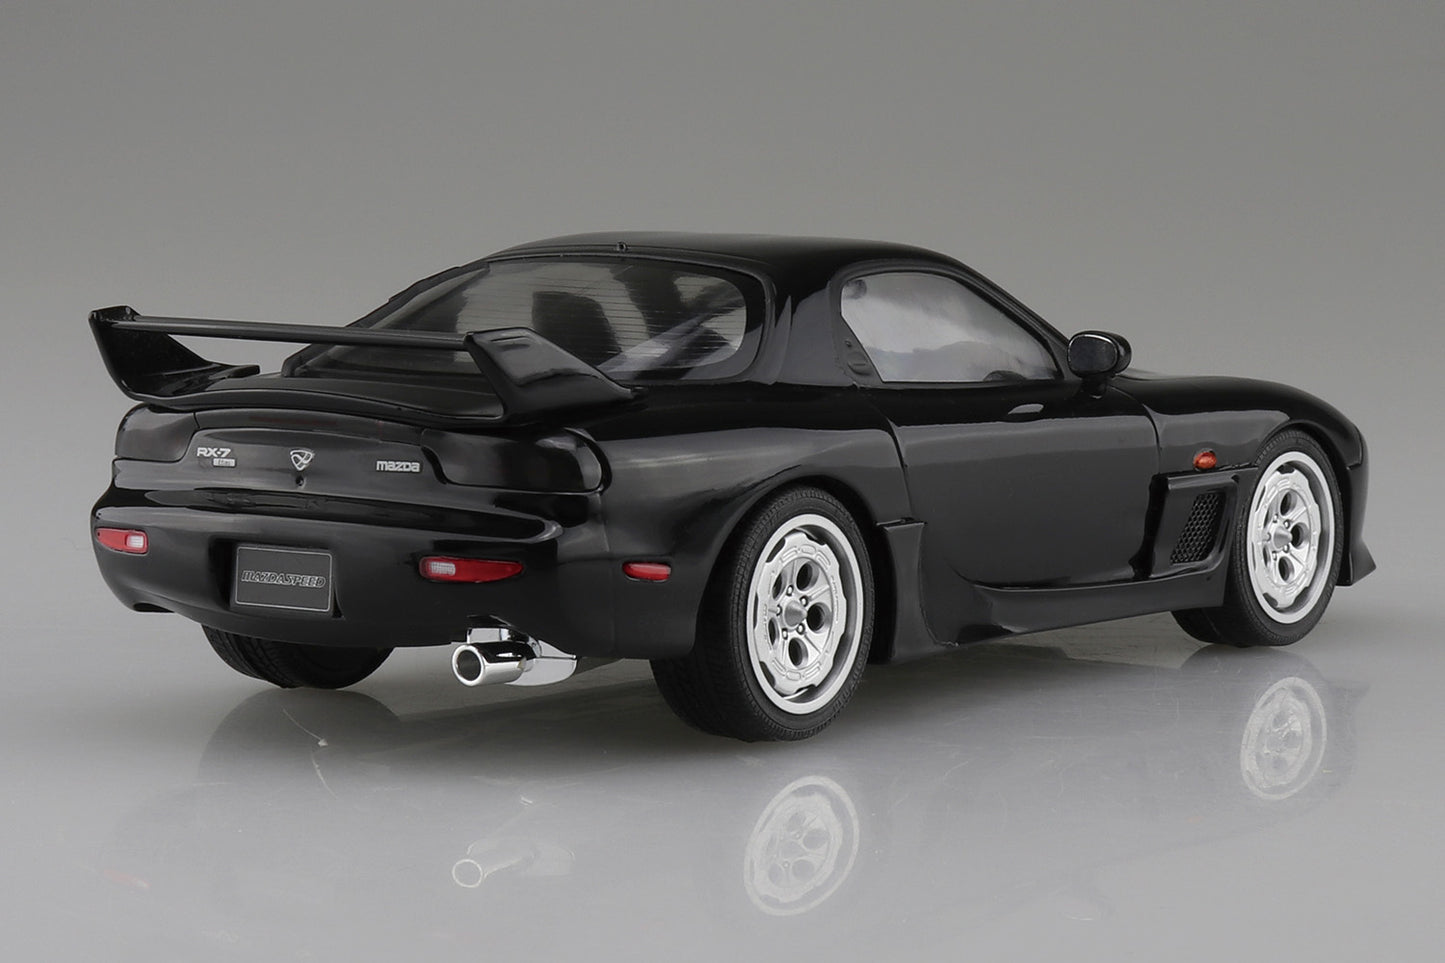 1/24 MAZDASPEED A-SPEC FD3S RX-7 '99 (MAZDA) - COMING SOON